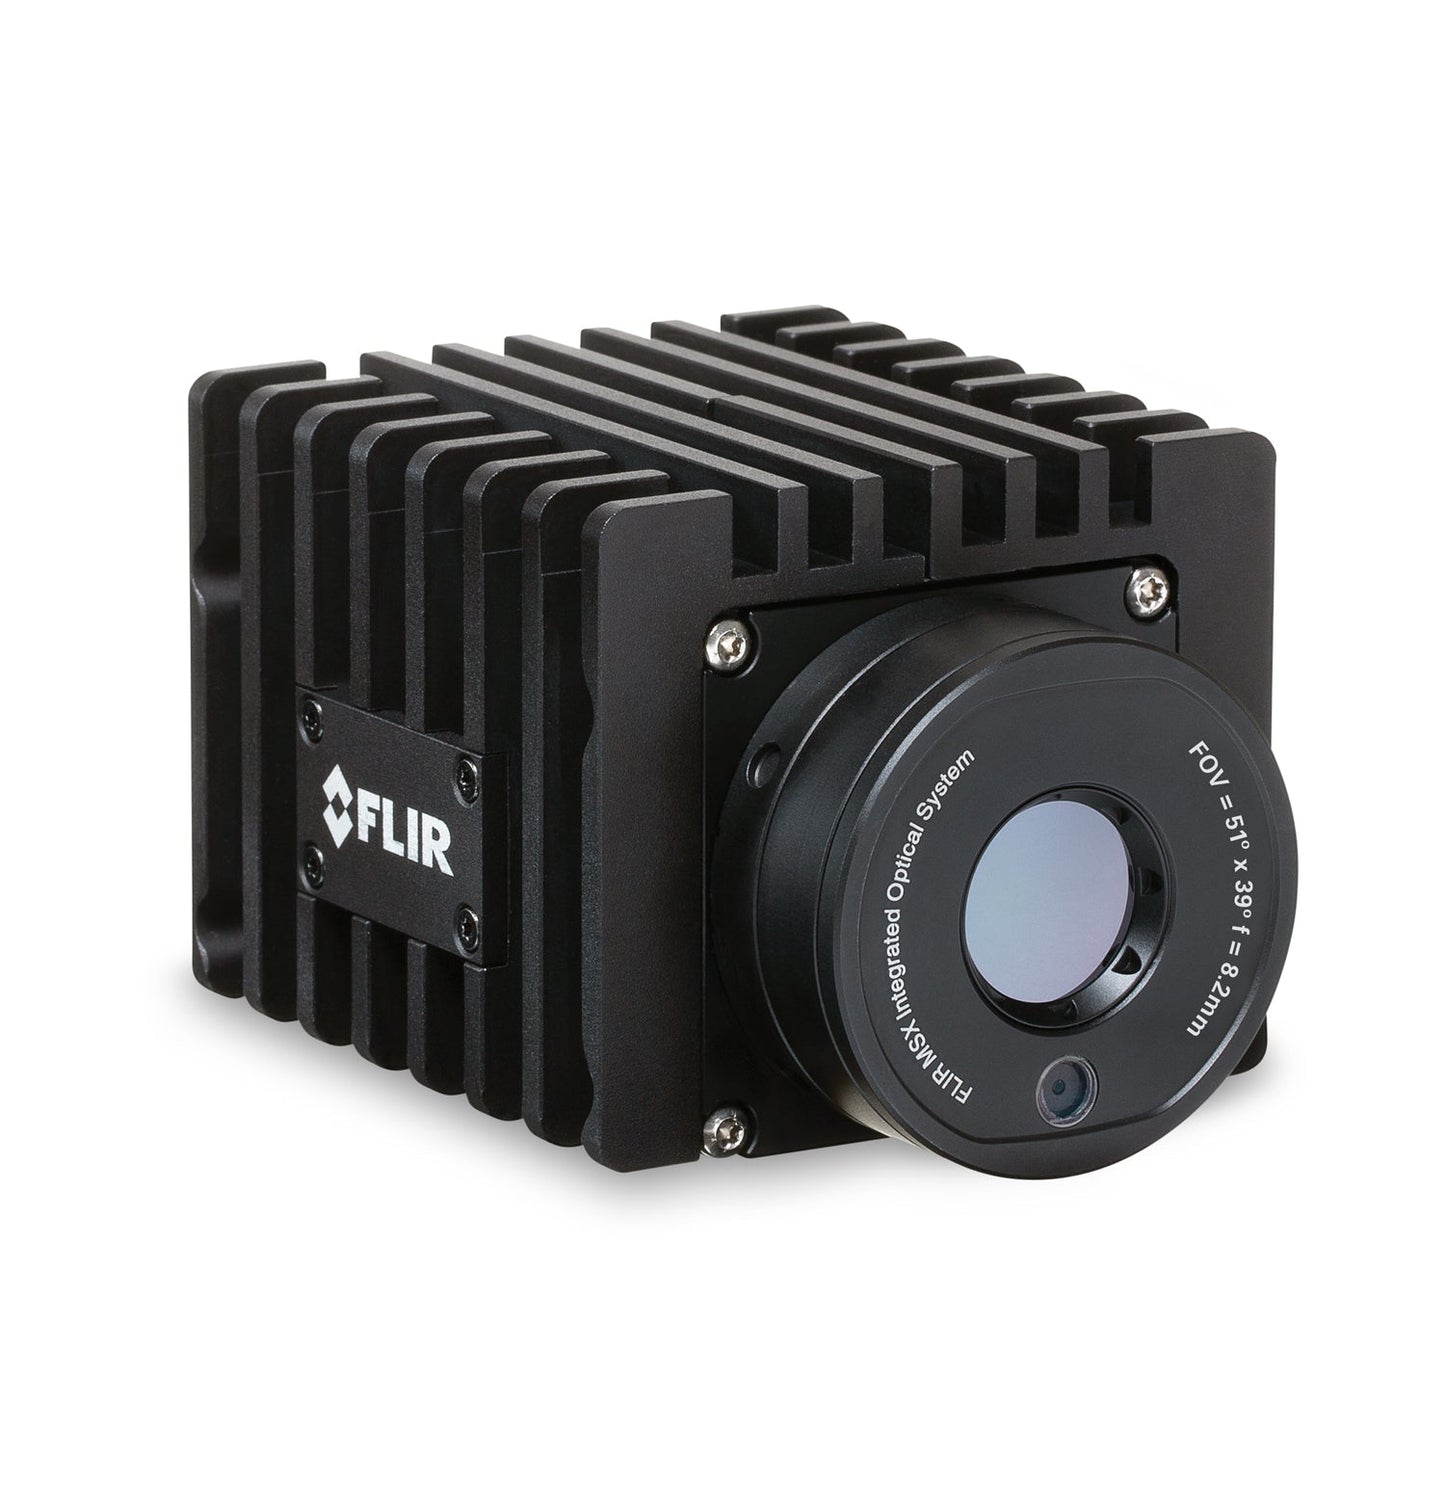 Hire Monthly - Teledyne FLIR - A50 29° Professional Science Kit